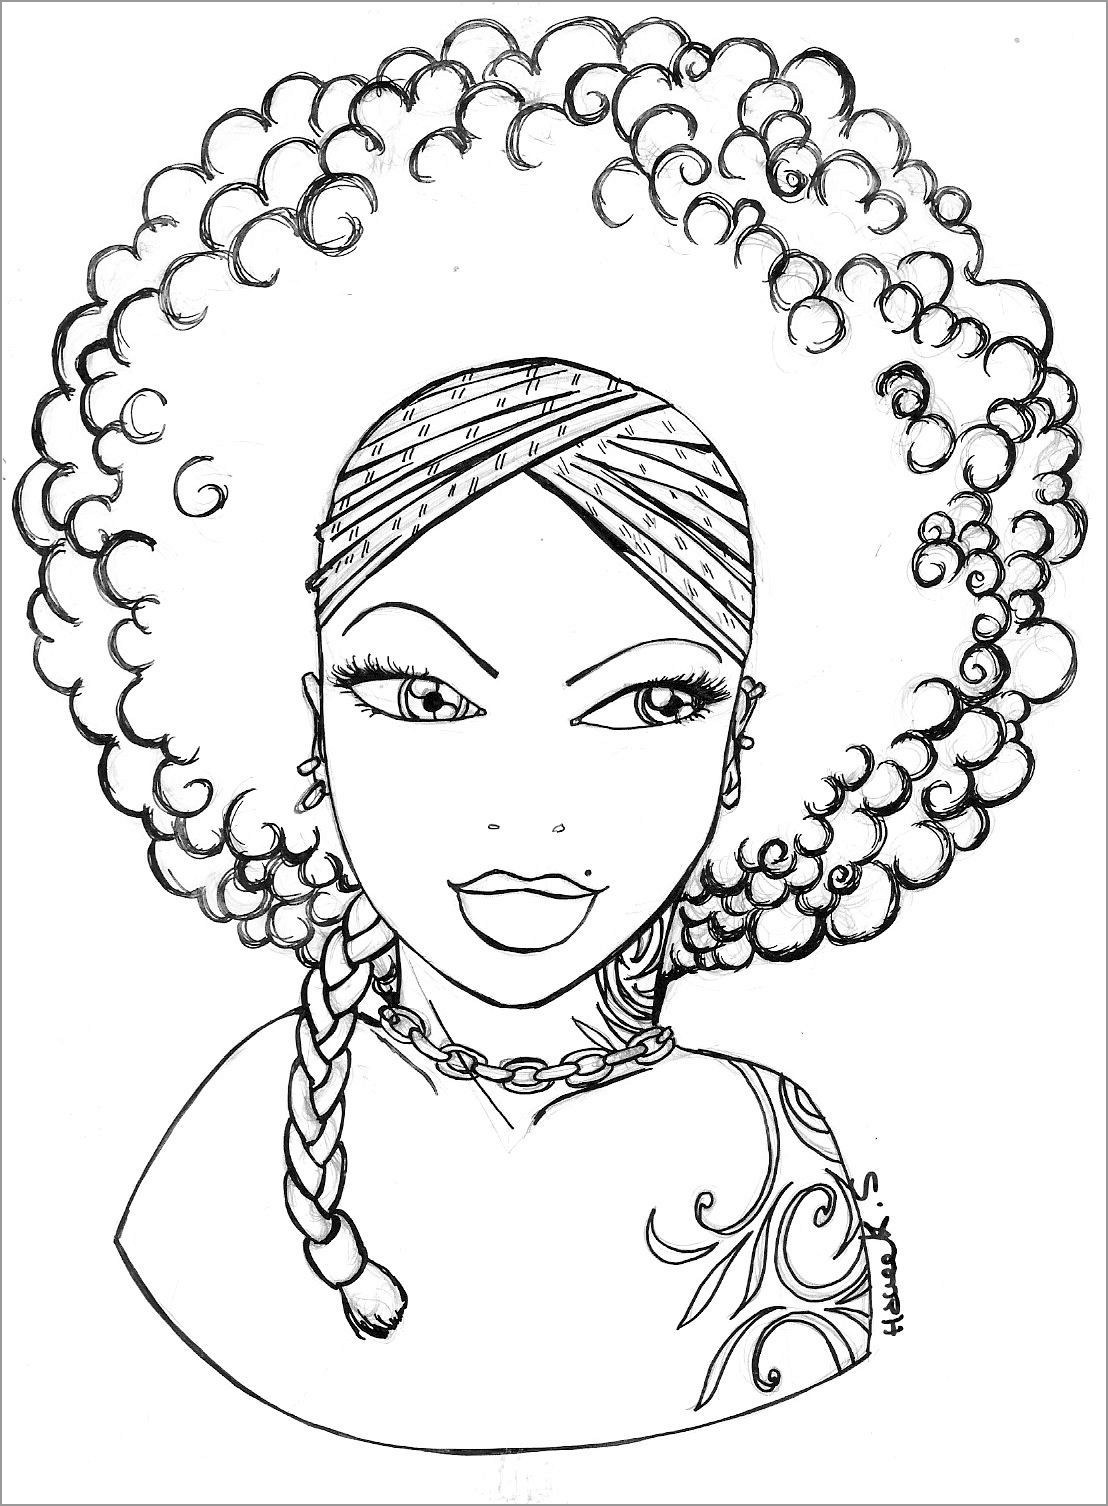 Coloring Pages : Afro Hair Coloring Pages Coloringbay Black Girl Image 55 Black  Girl Coloring Pages Image Inspirations ~ Off-The Wall ATL